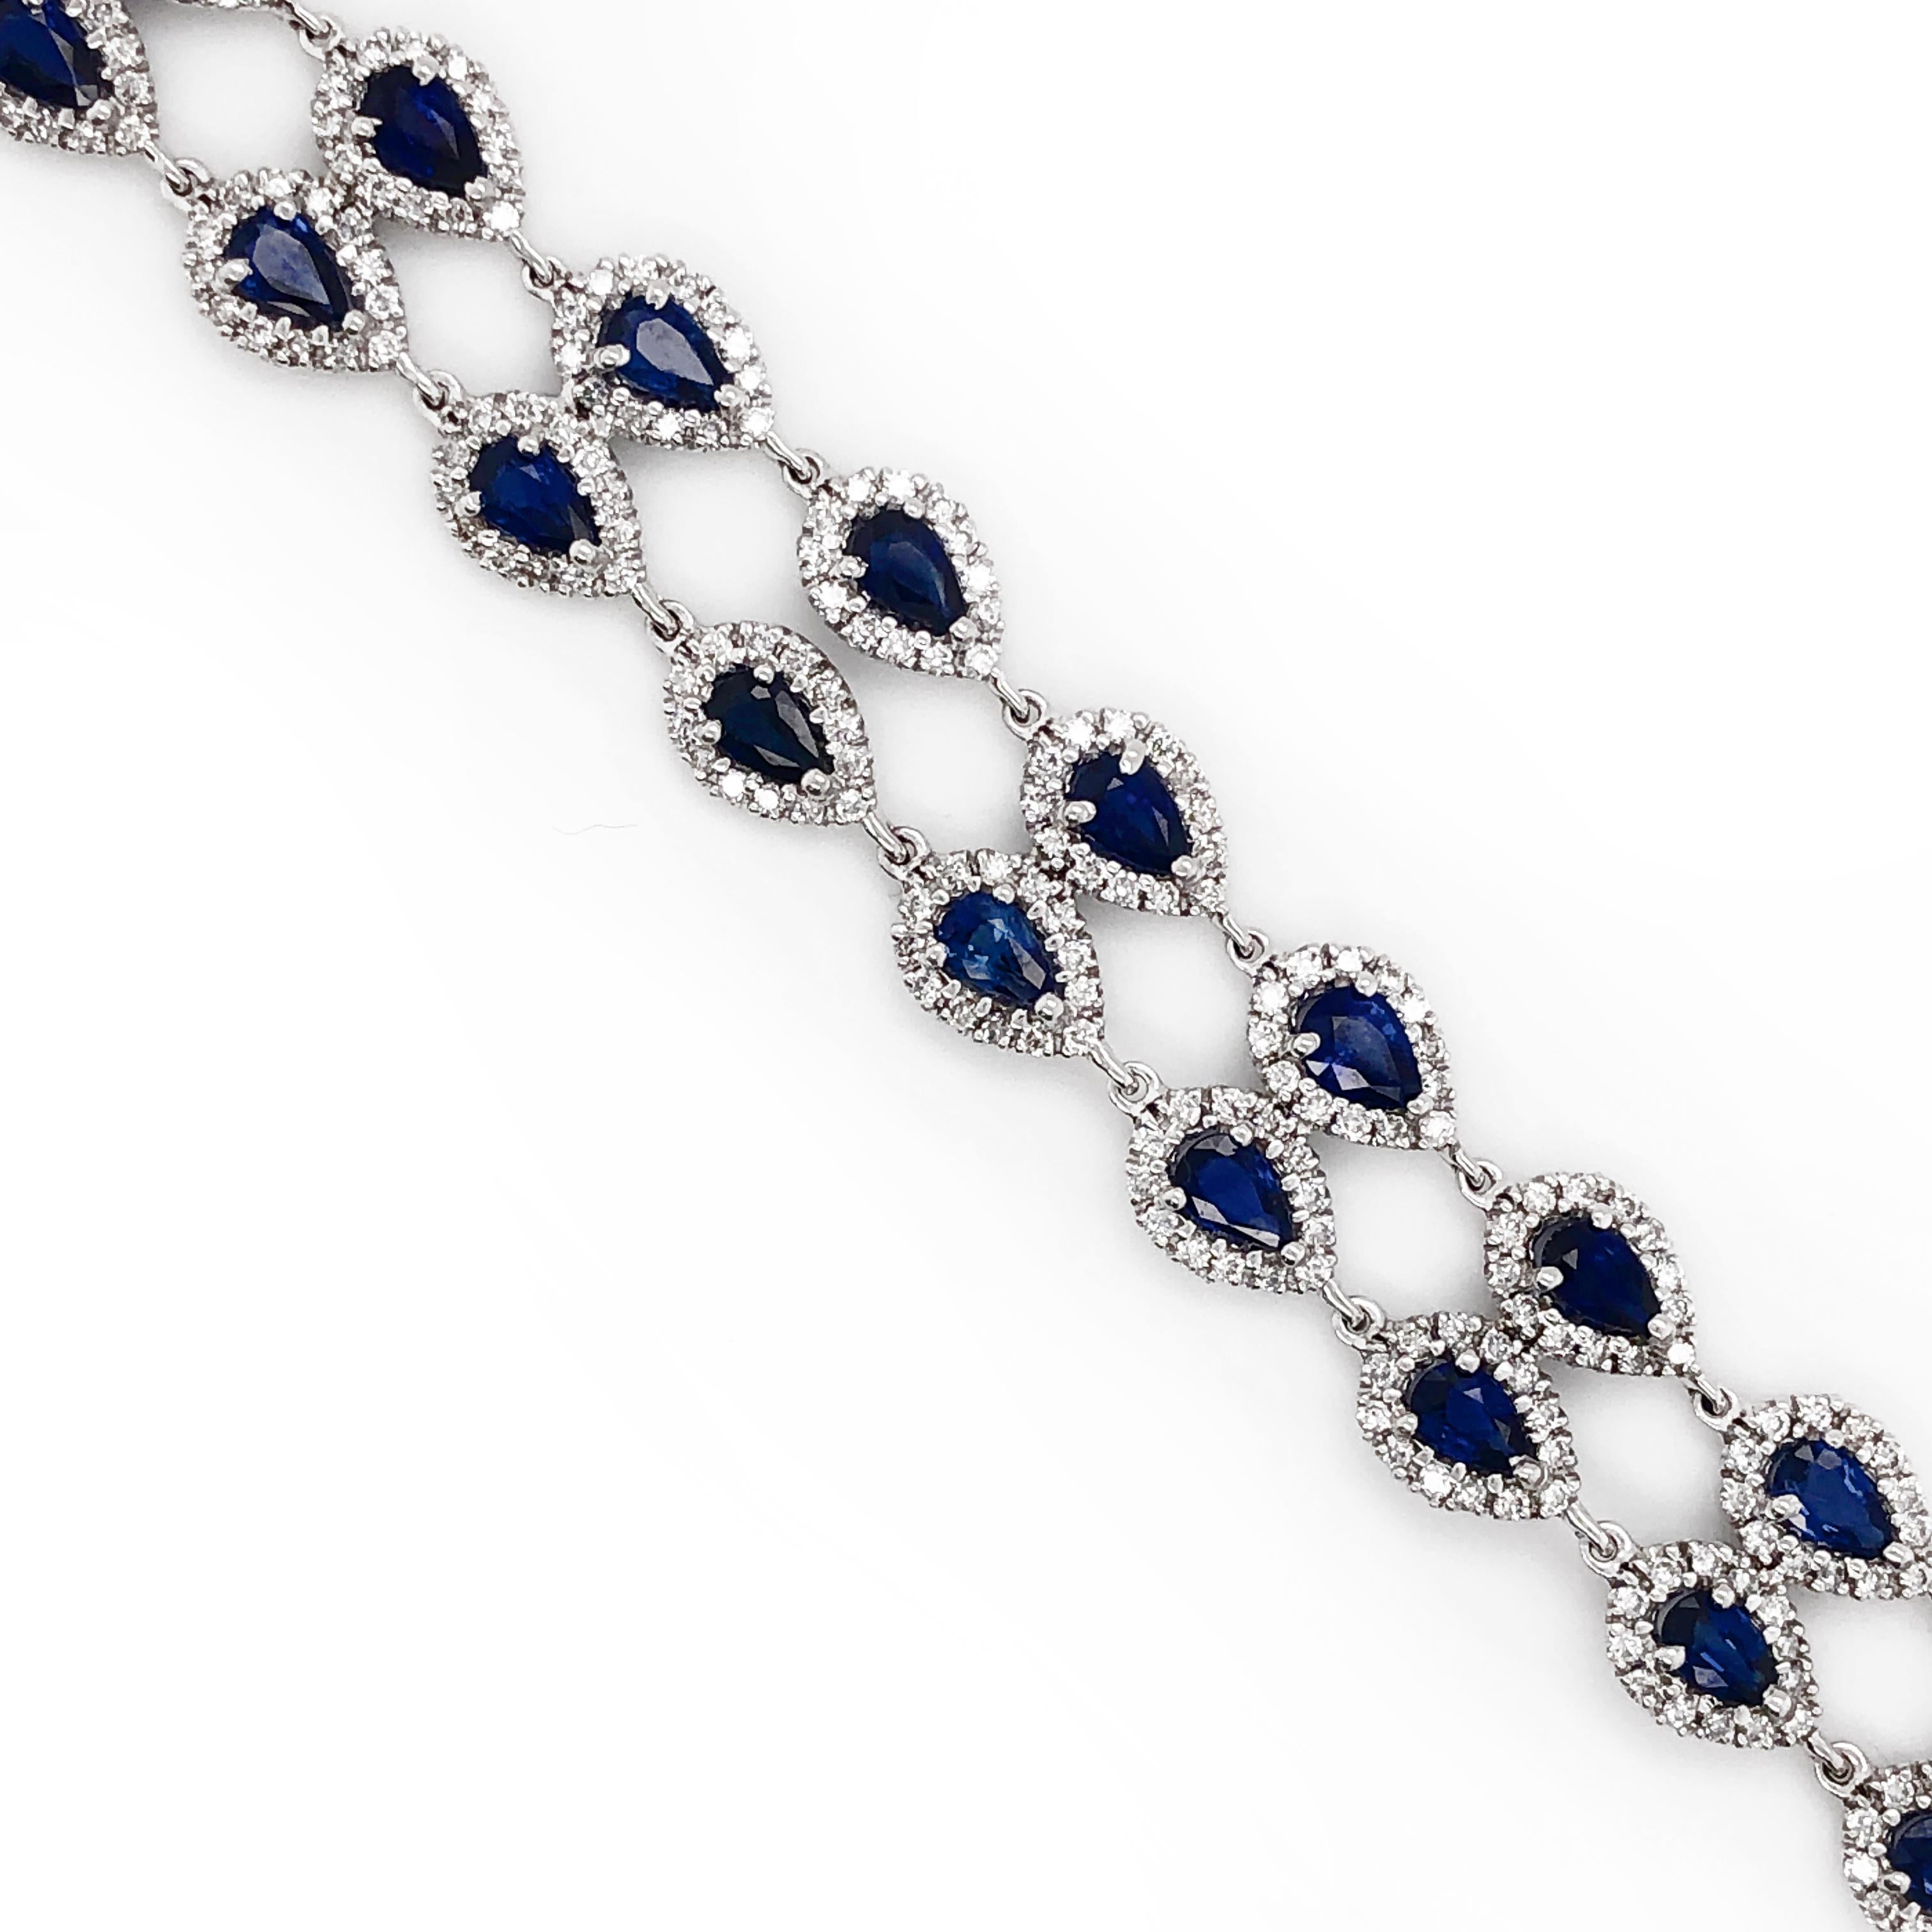 A classic platinum 950 bracelet adorned with pear cut deep blue Ceylon sapphires 12.91 ct surrounded by white diamonds 3.68 ct. Diamonds are natural and G-H Color Clarity VS.   Art Deco inspired. A classic and elegant design, a timeless piece you